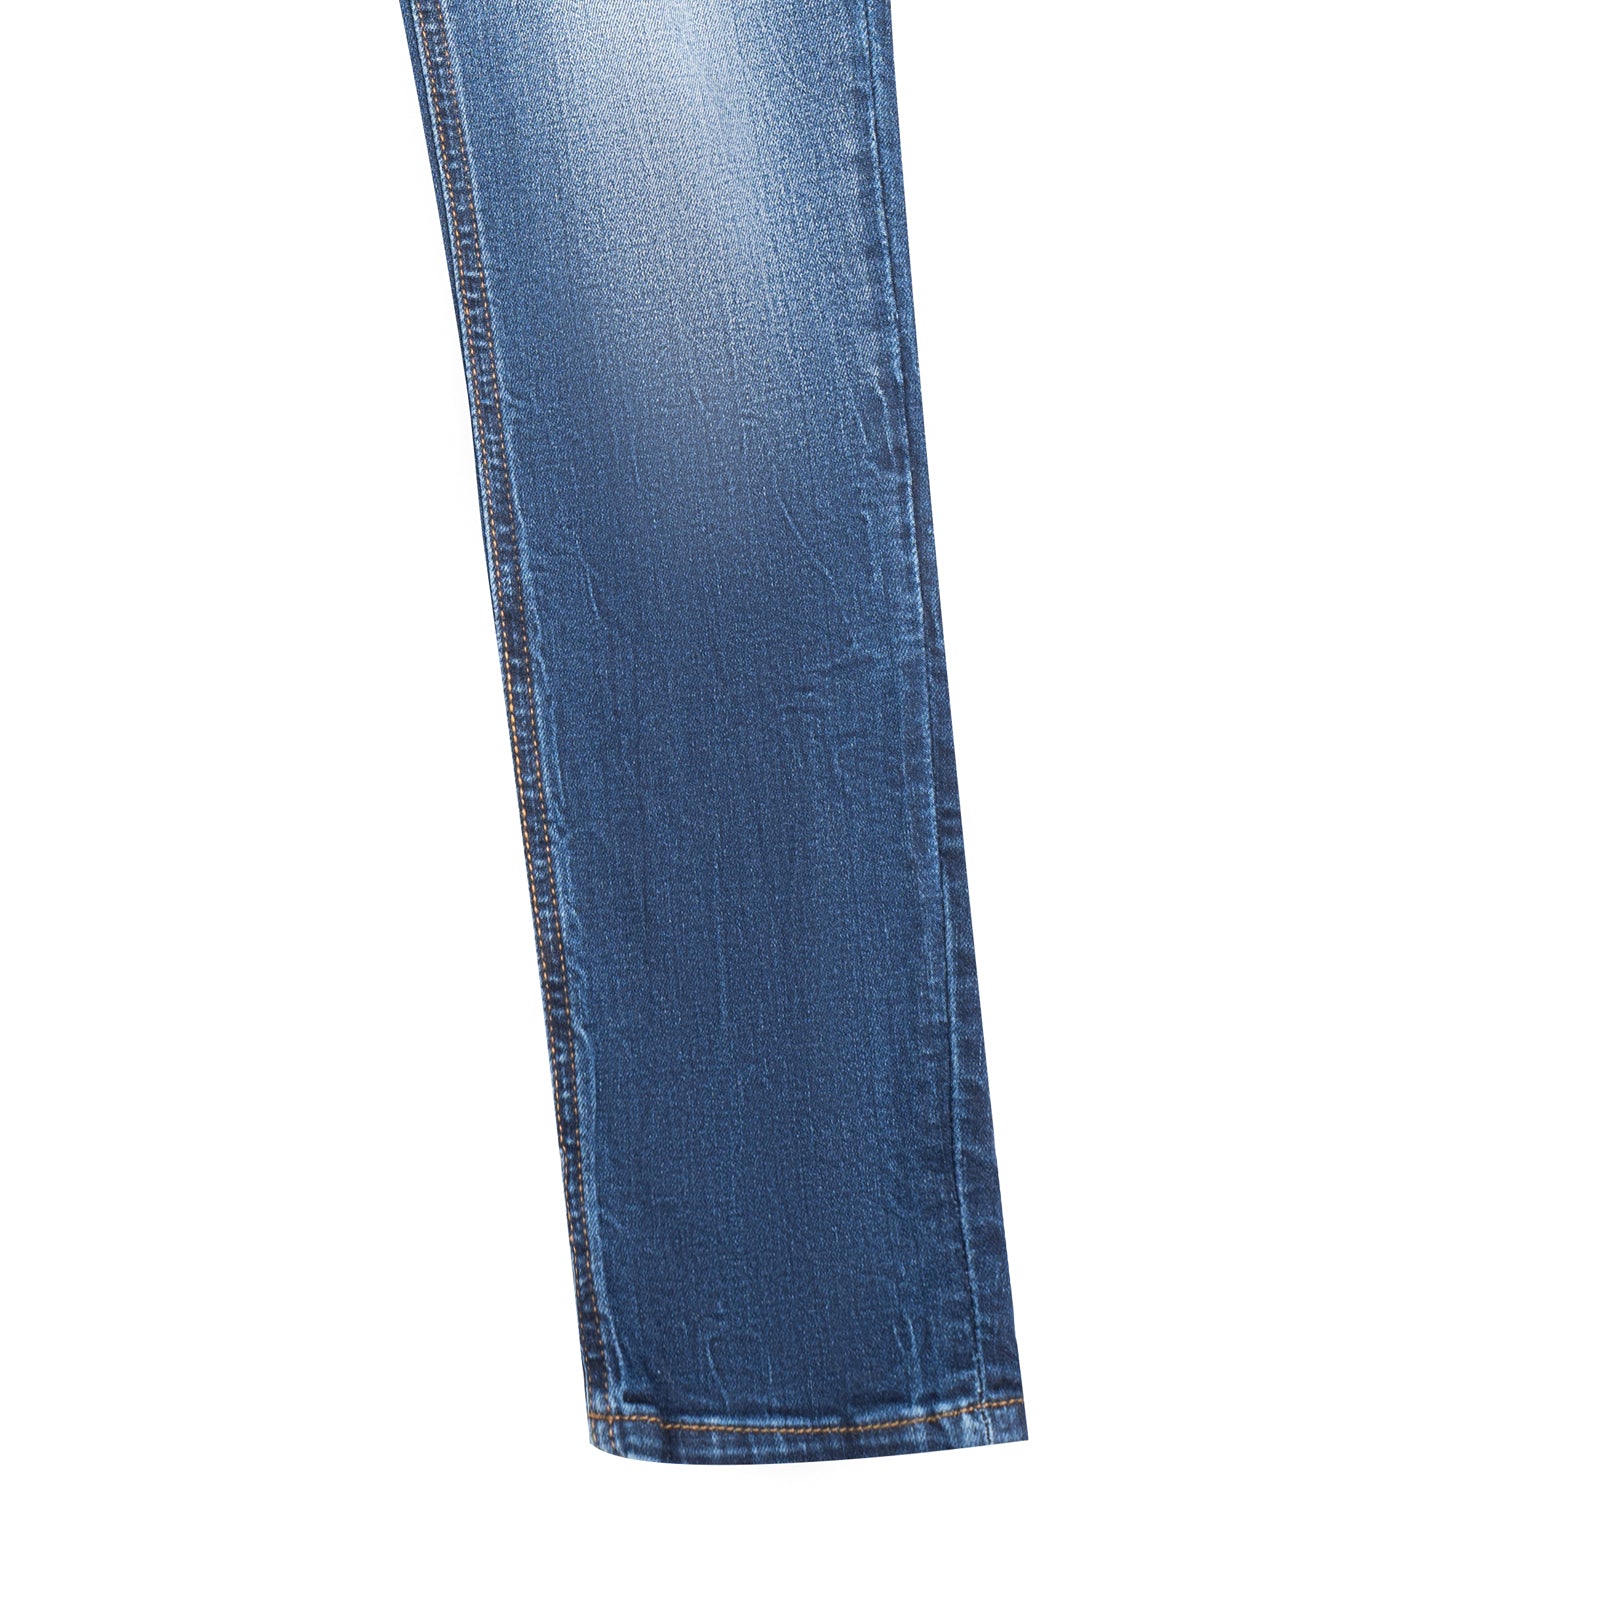 High Rise Skinny Mid Indigo Fit Jeans